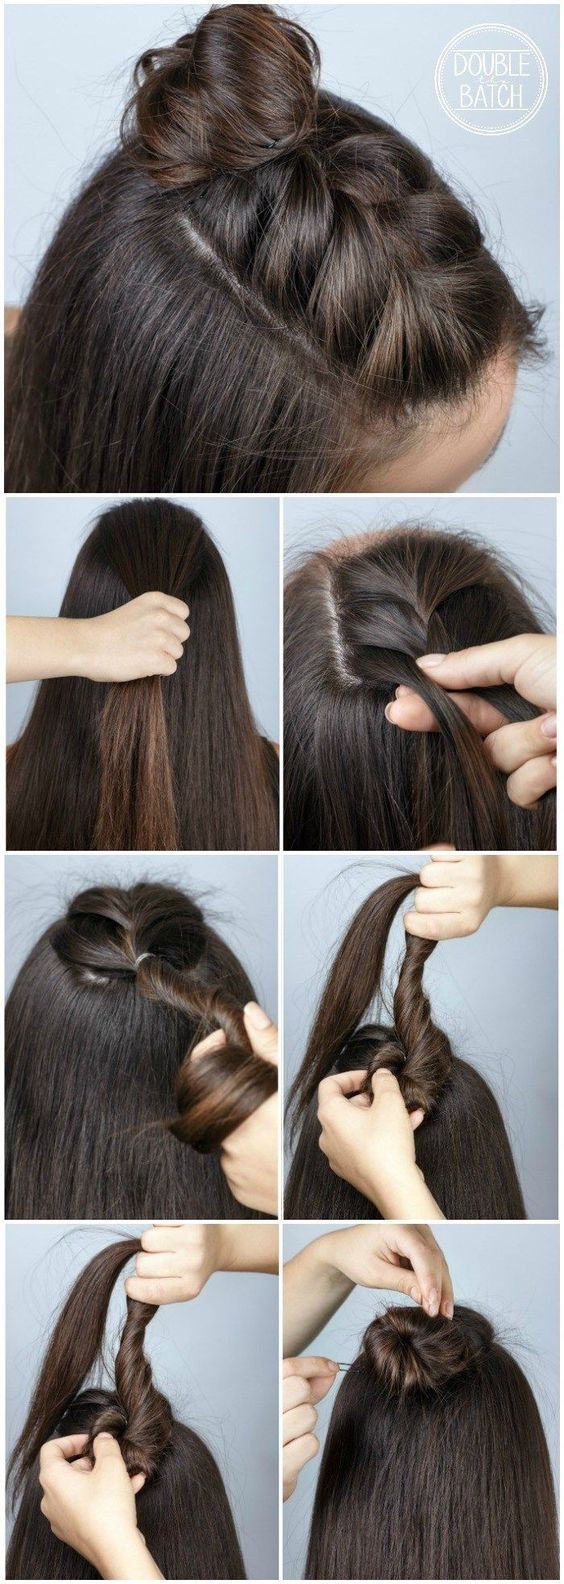 Easy Hairstyles To Do Yourself For School
 22 Quick and Easy Back to School Hairstyle Tutorials